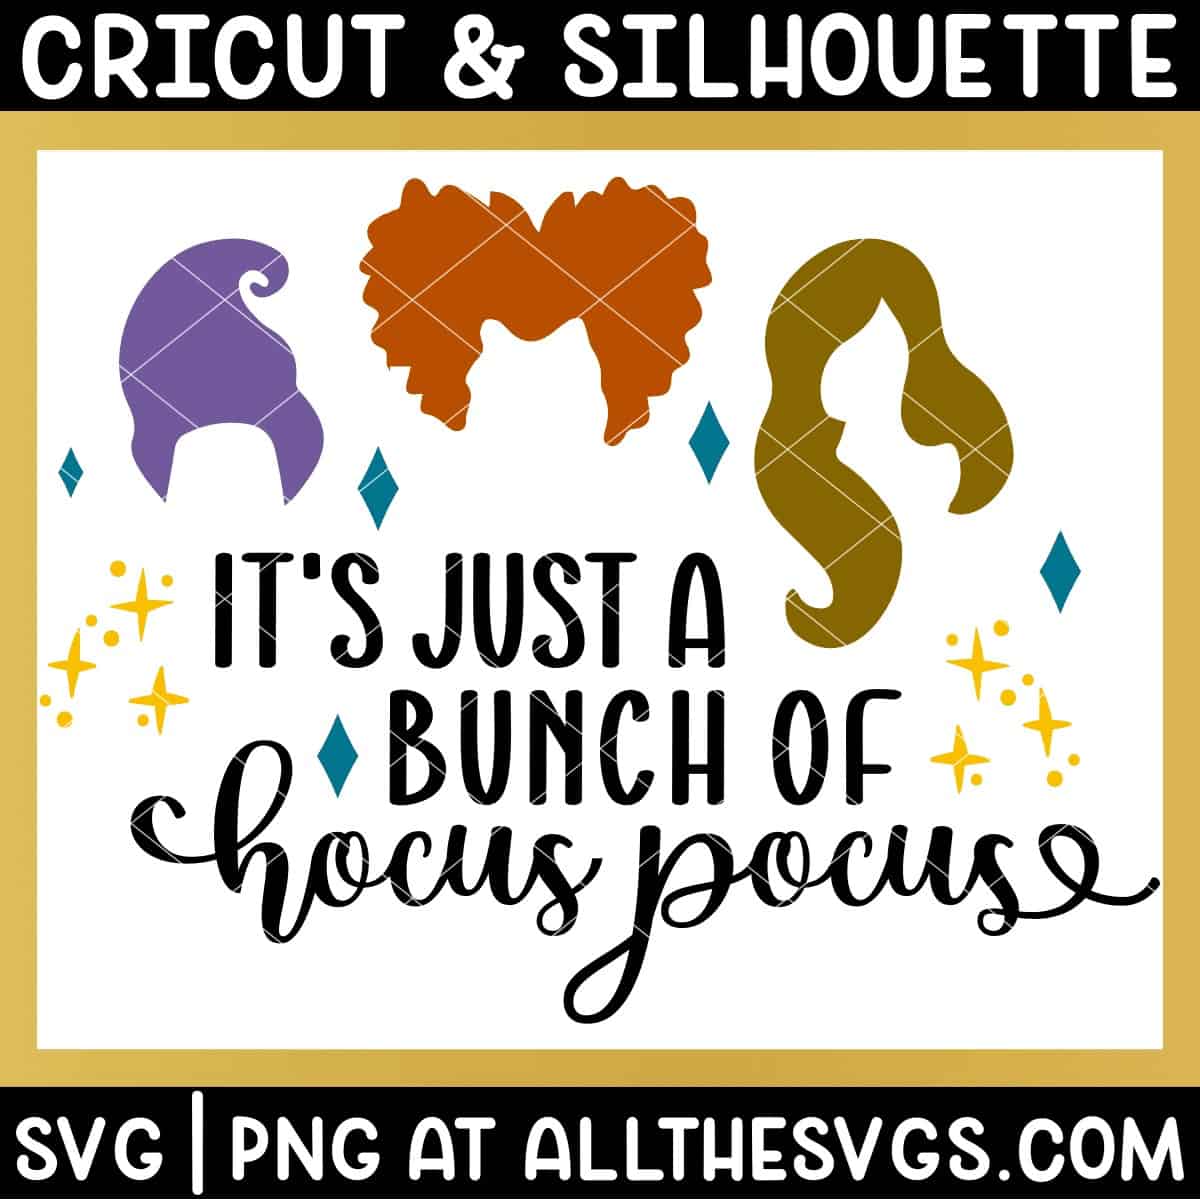 just a bunch of hocus pocus svg file with sanderson sisters.